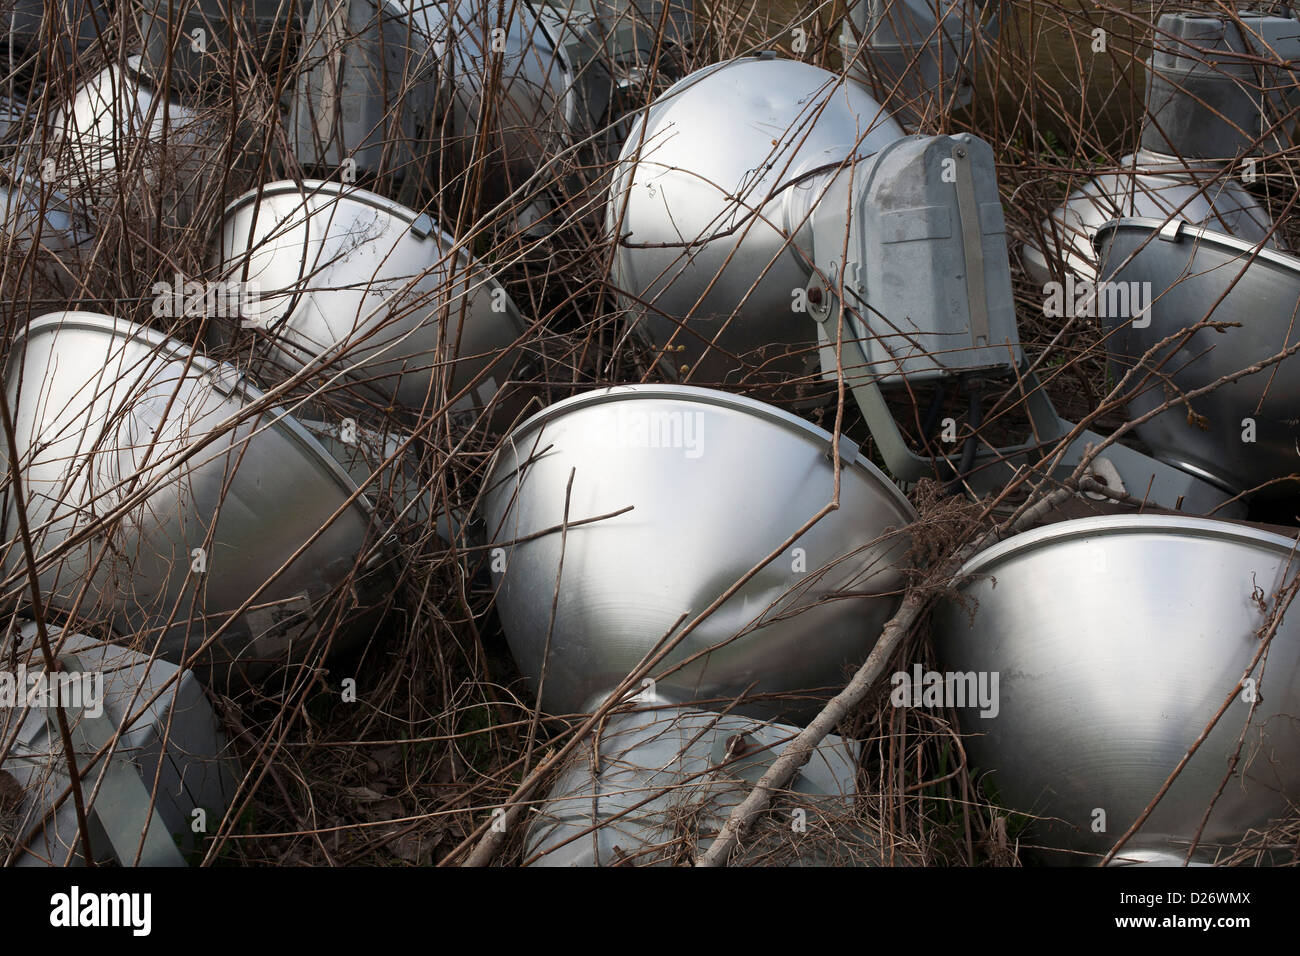 Street lamps lie abandoned in the weeds in a municipal dumping area. Stock Photo